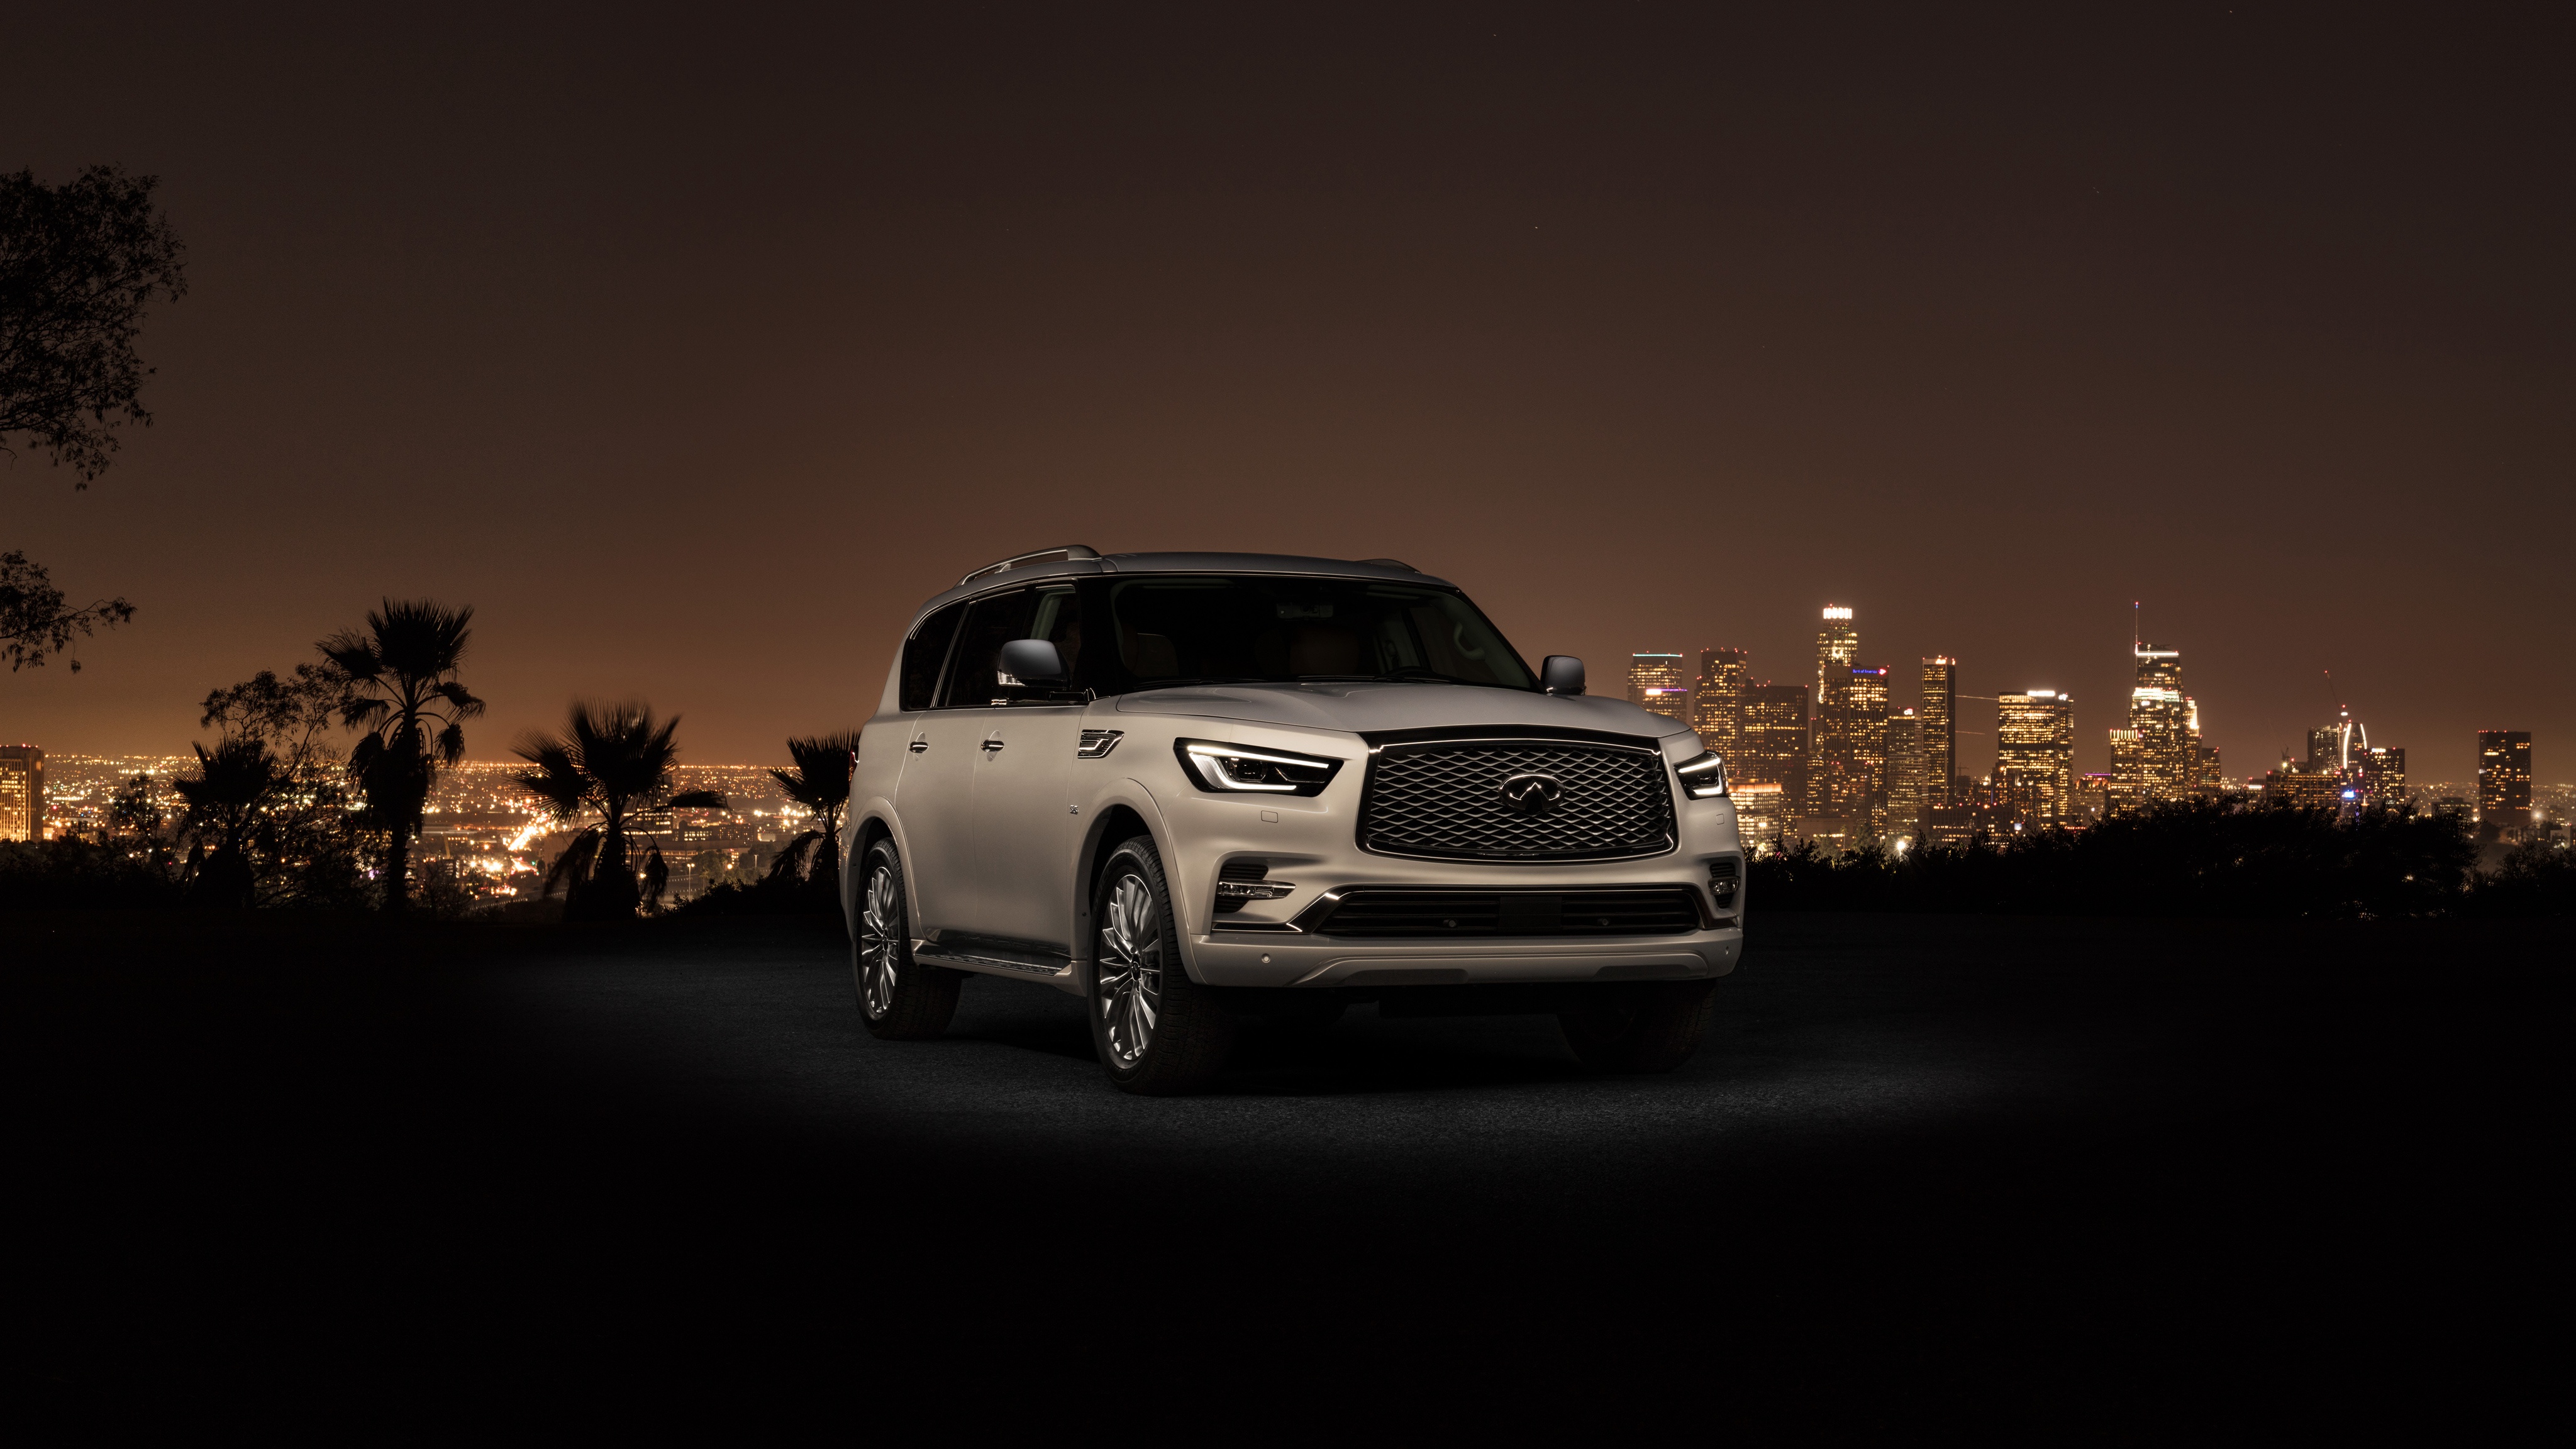 Best Infiniti Qx80 Background for mobile